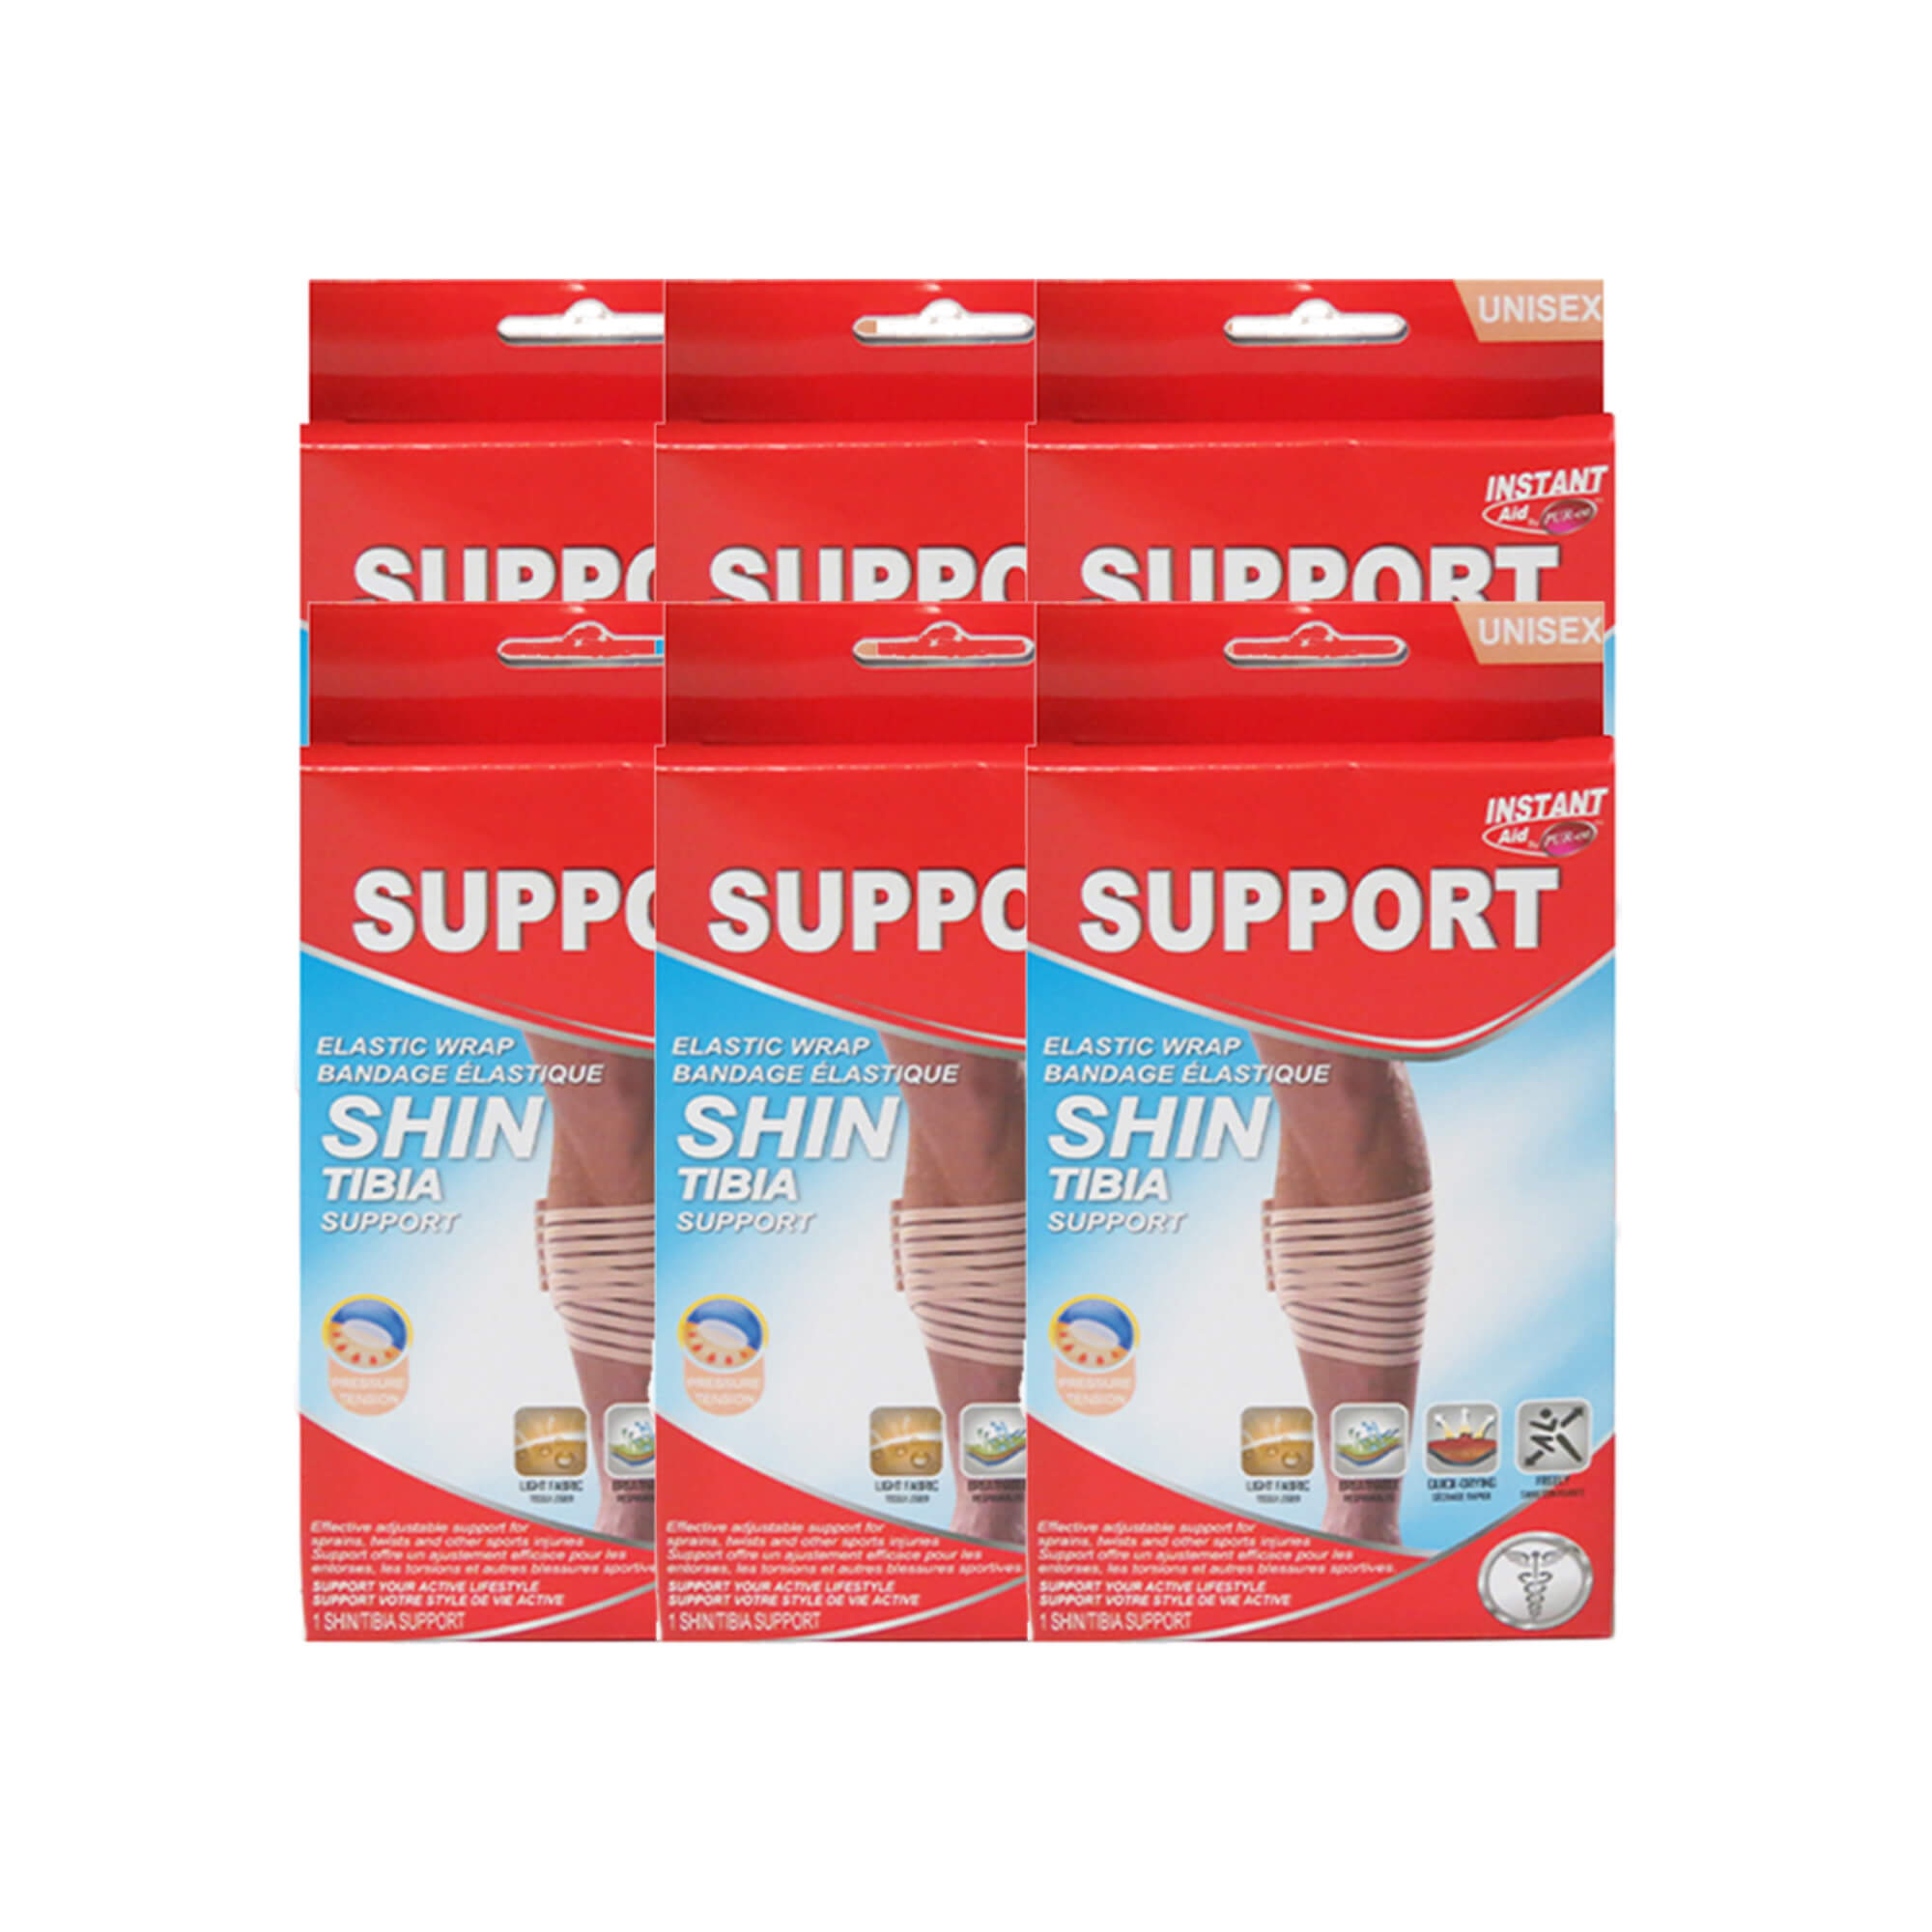 Instant Aid Elastic Wrap Shin Support by Purest, Pack of 6